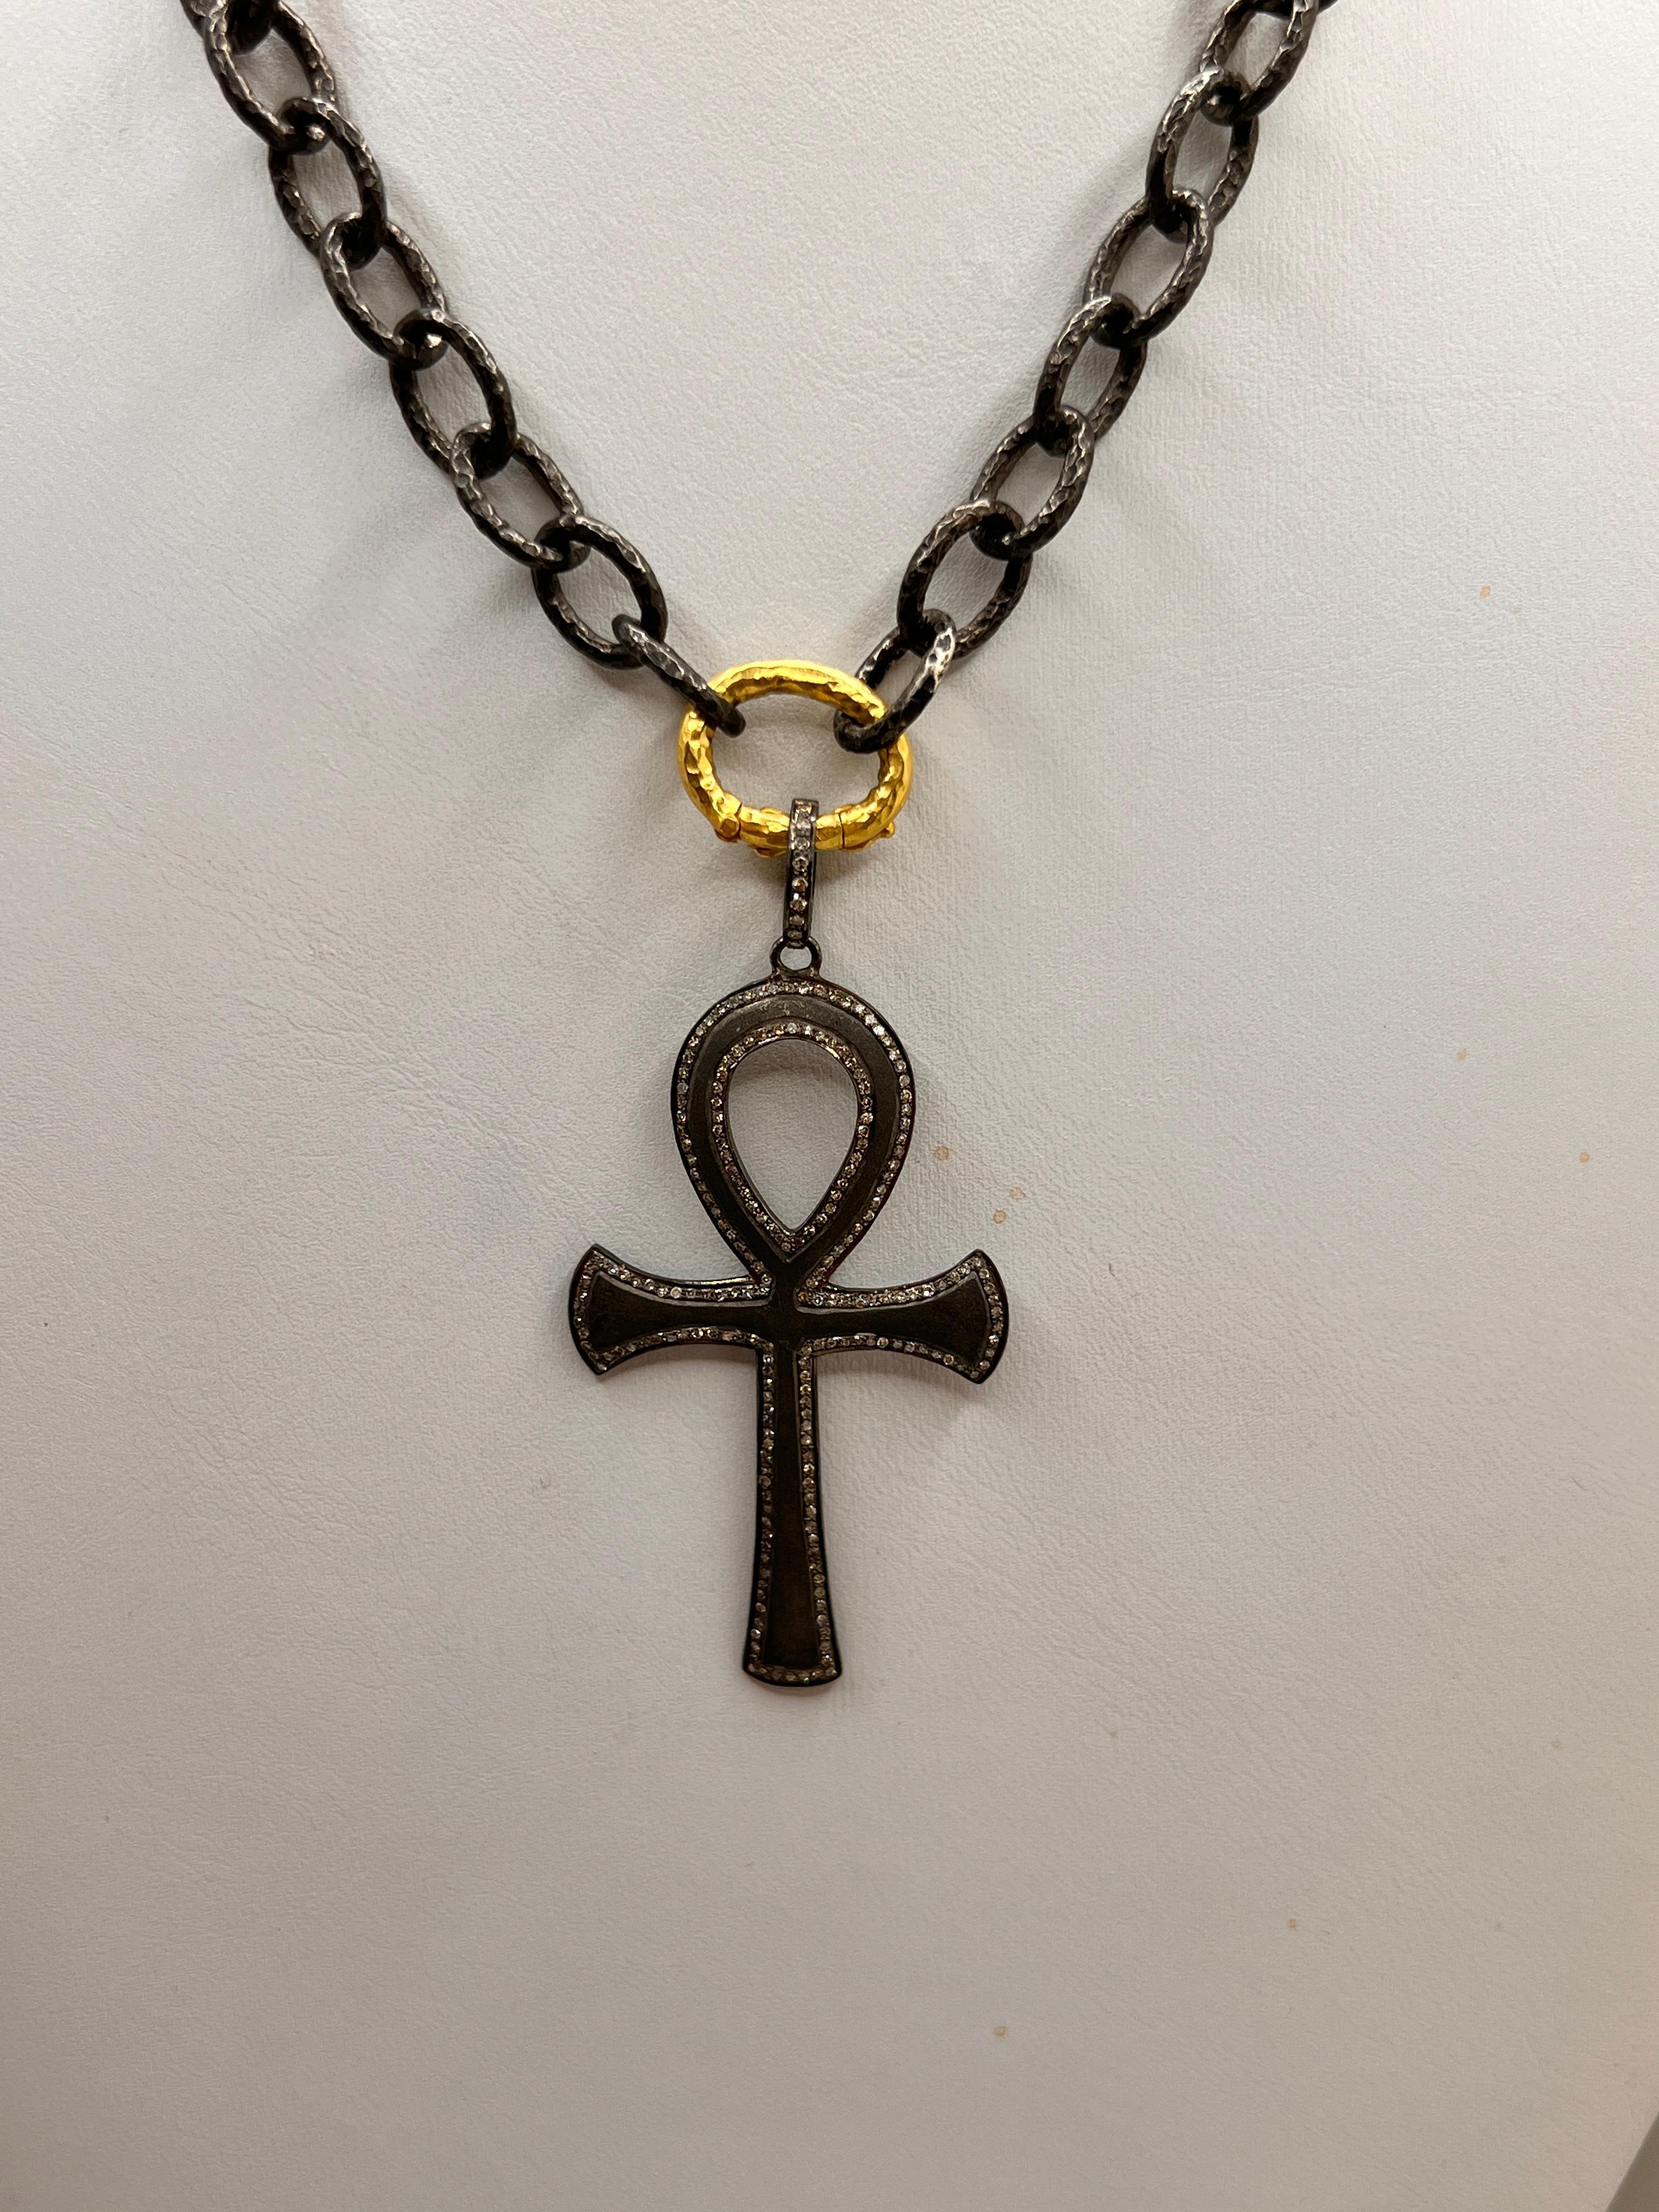 Artisan Blackened Silver, Gold and Diamond Ankh Necklace, by Tagili